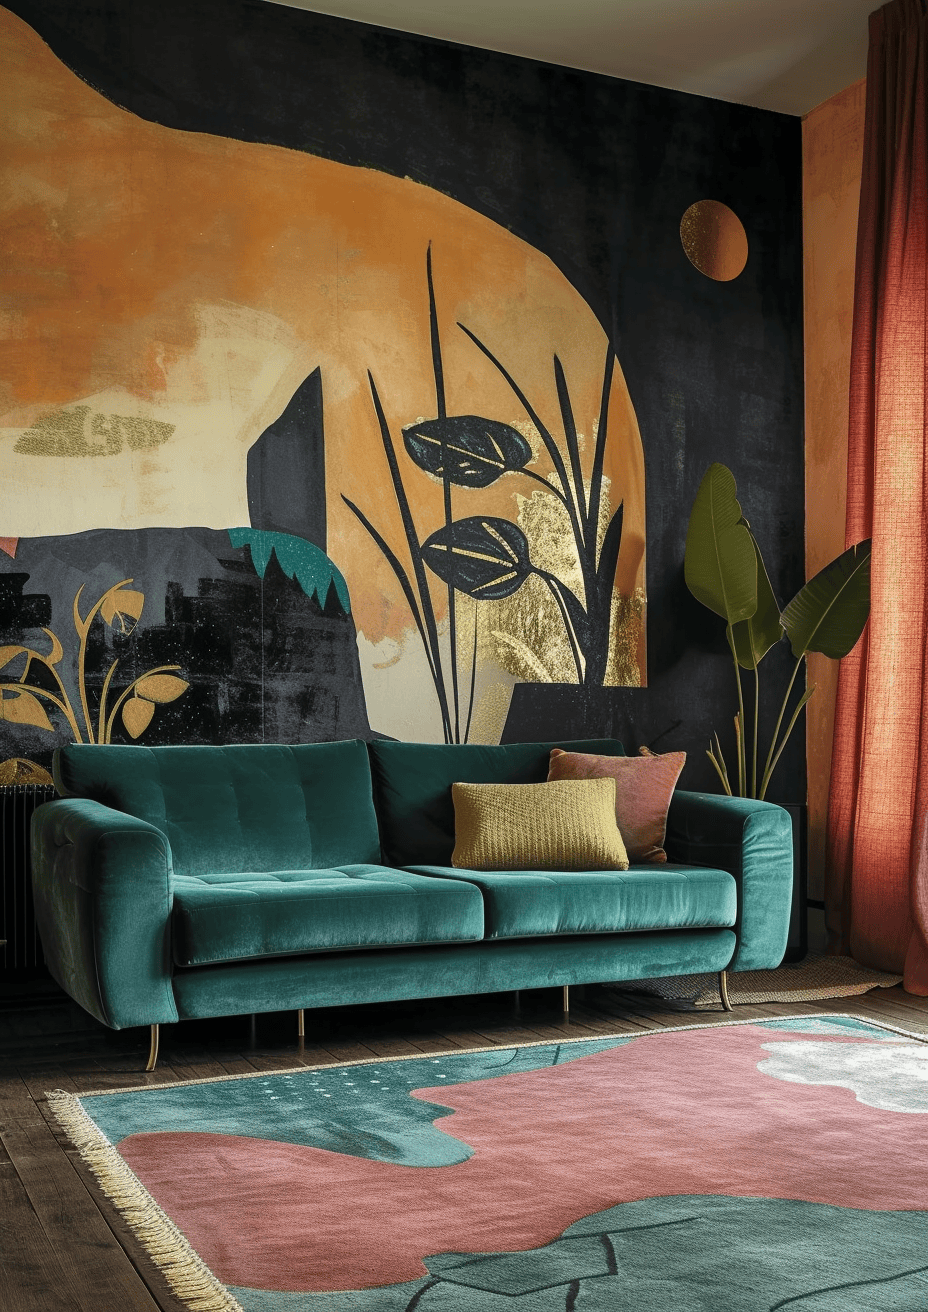 Art Deco living room inspiration drawn from the opulent and geometric designs of the 1920s